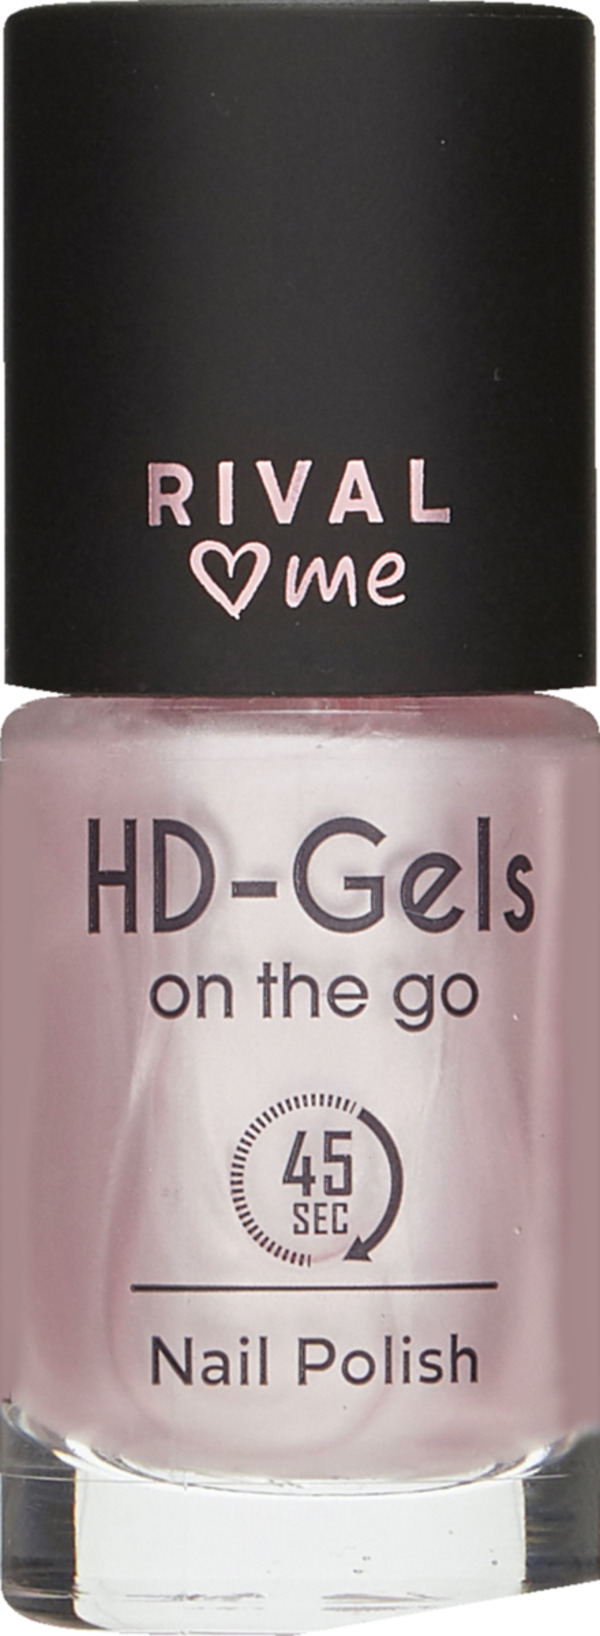 Bild 1 von RIVAL loves me HD-Gels on the go 04 pearl nude